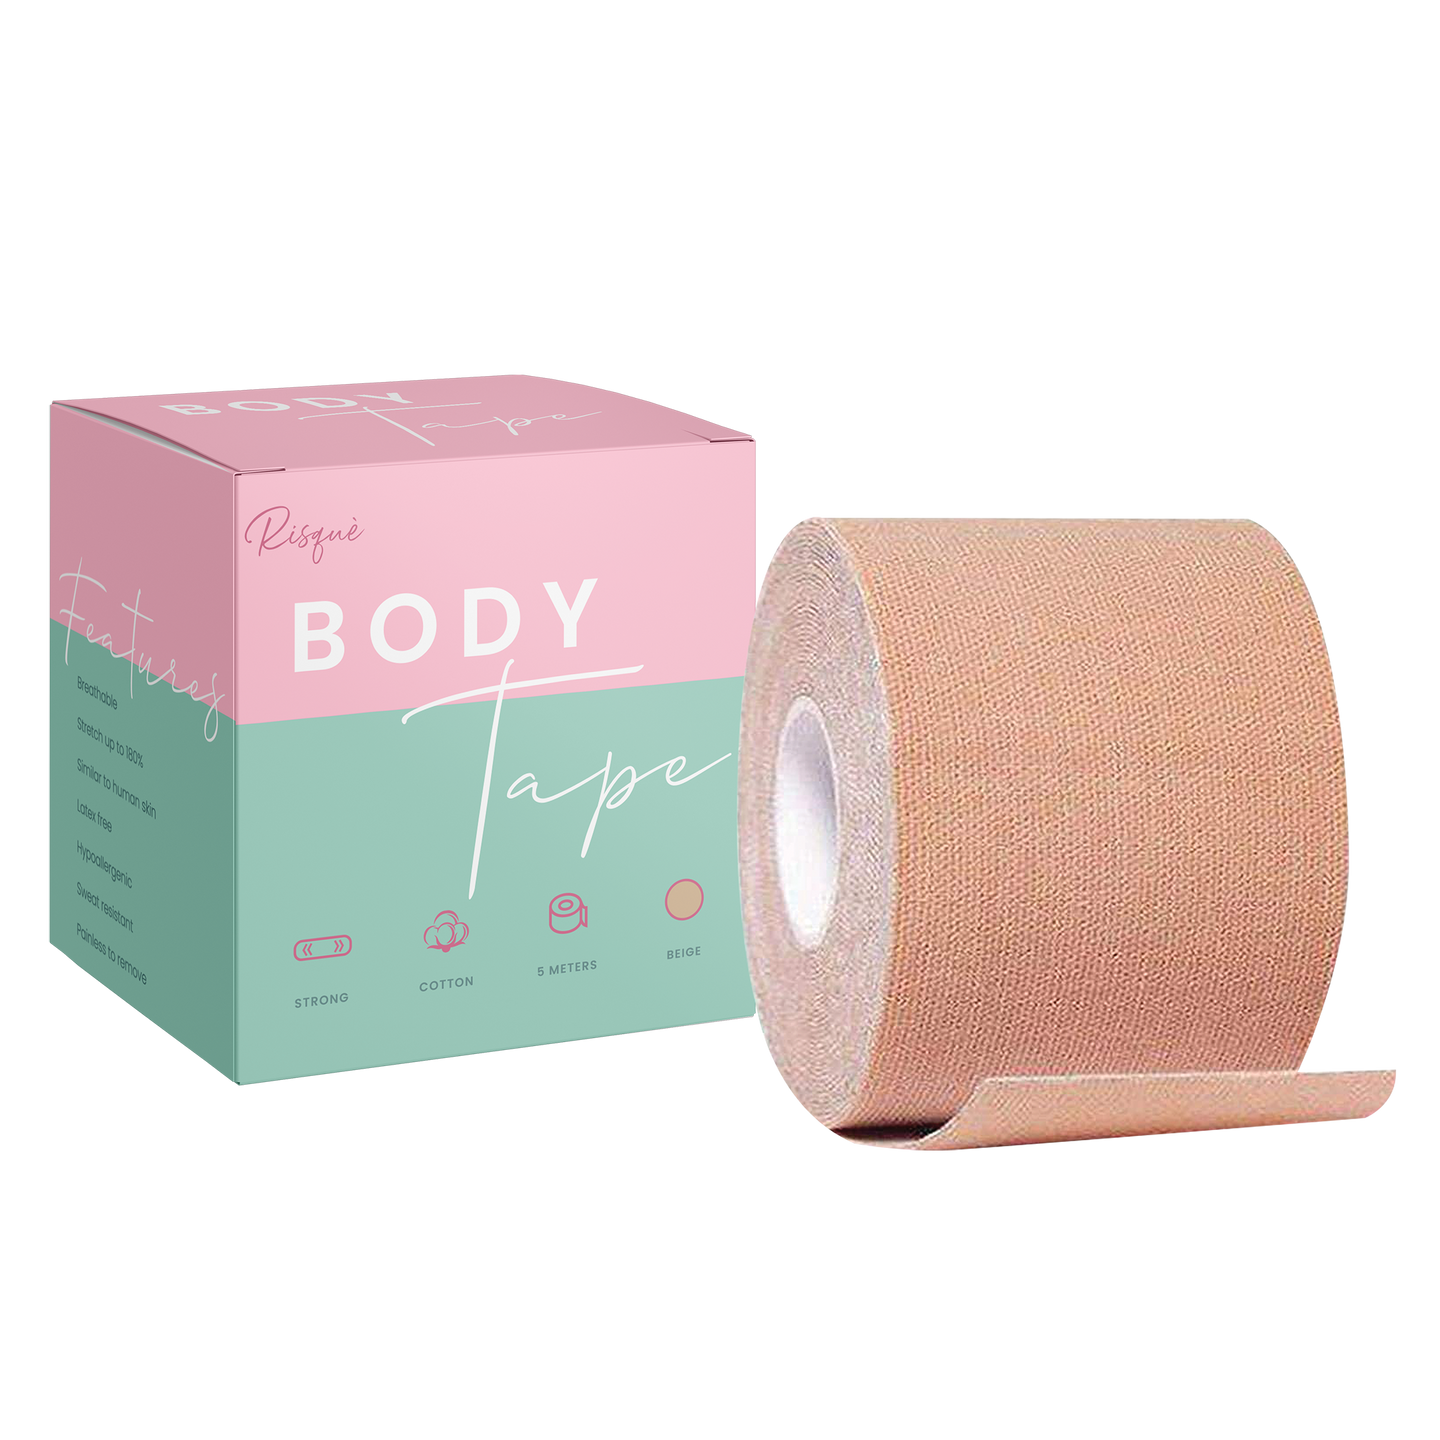 Breast Lift Tape for Lift & Fashion, Bra Alternative of Breasts, Achieve  Lift and Push up in All Clothing, Fabric, Dresses, Waterproof,  Sweat-Proof, Invisible Under Clothing